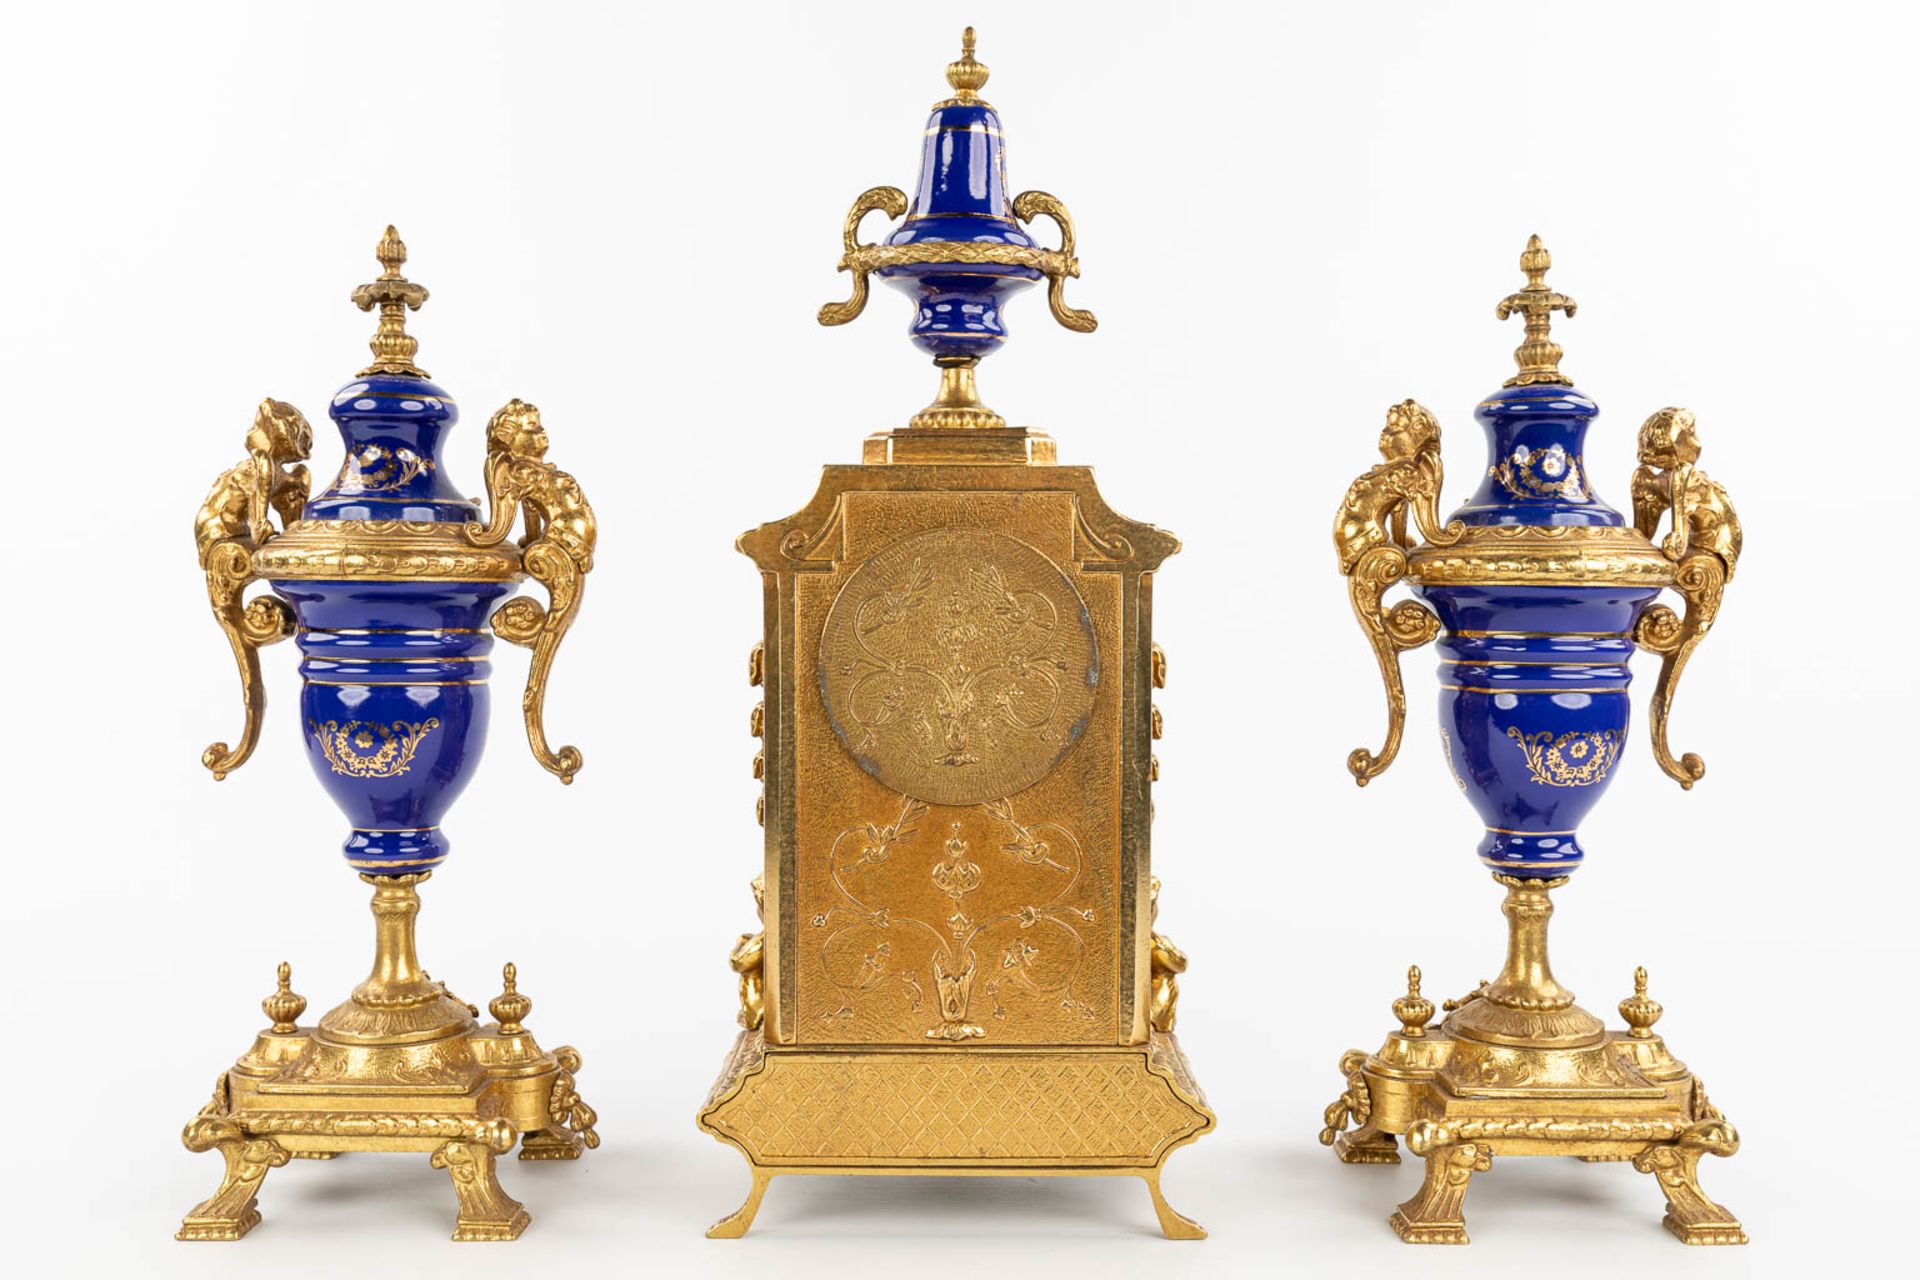 A three-piece mantle garniture clock made of bronze and porcelain and marked Imperial. (H:43cm) - Image 6 of 12